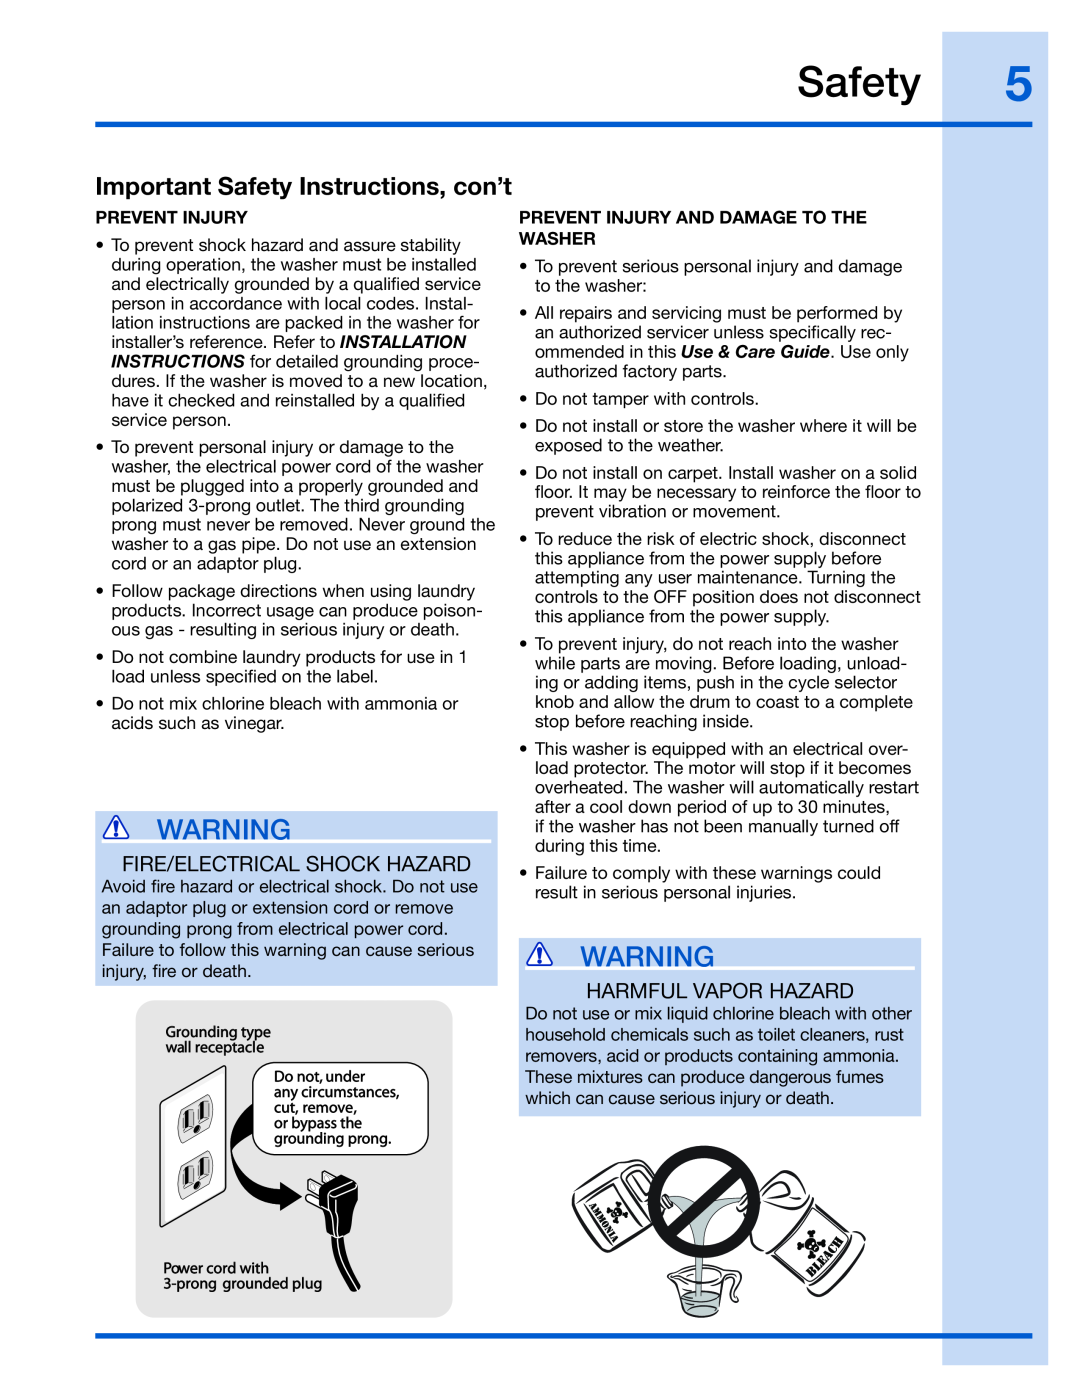 Electrolux 137023200 A manual Important Safety Instructions, con’t, Fire/Electrical Shock Hazard, Harmful Vapor Hazard 